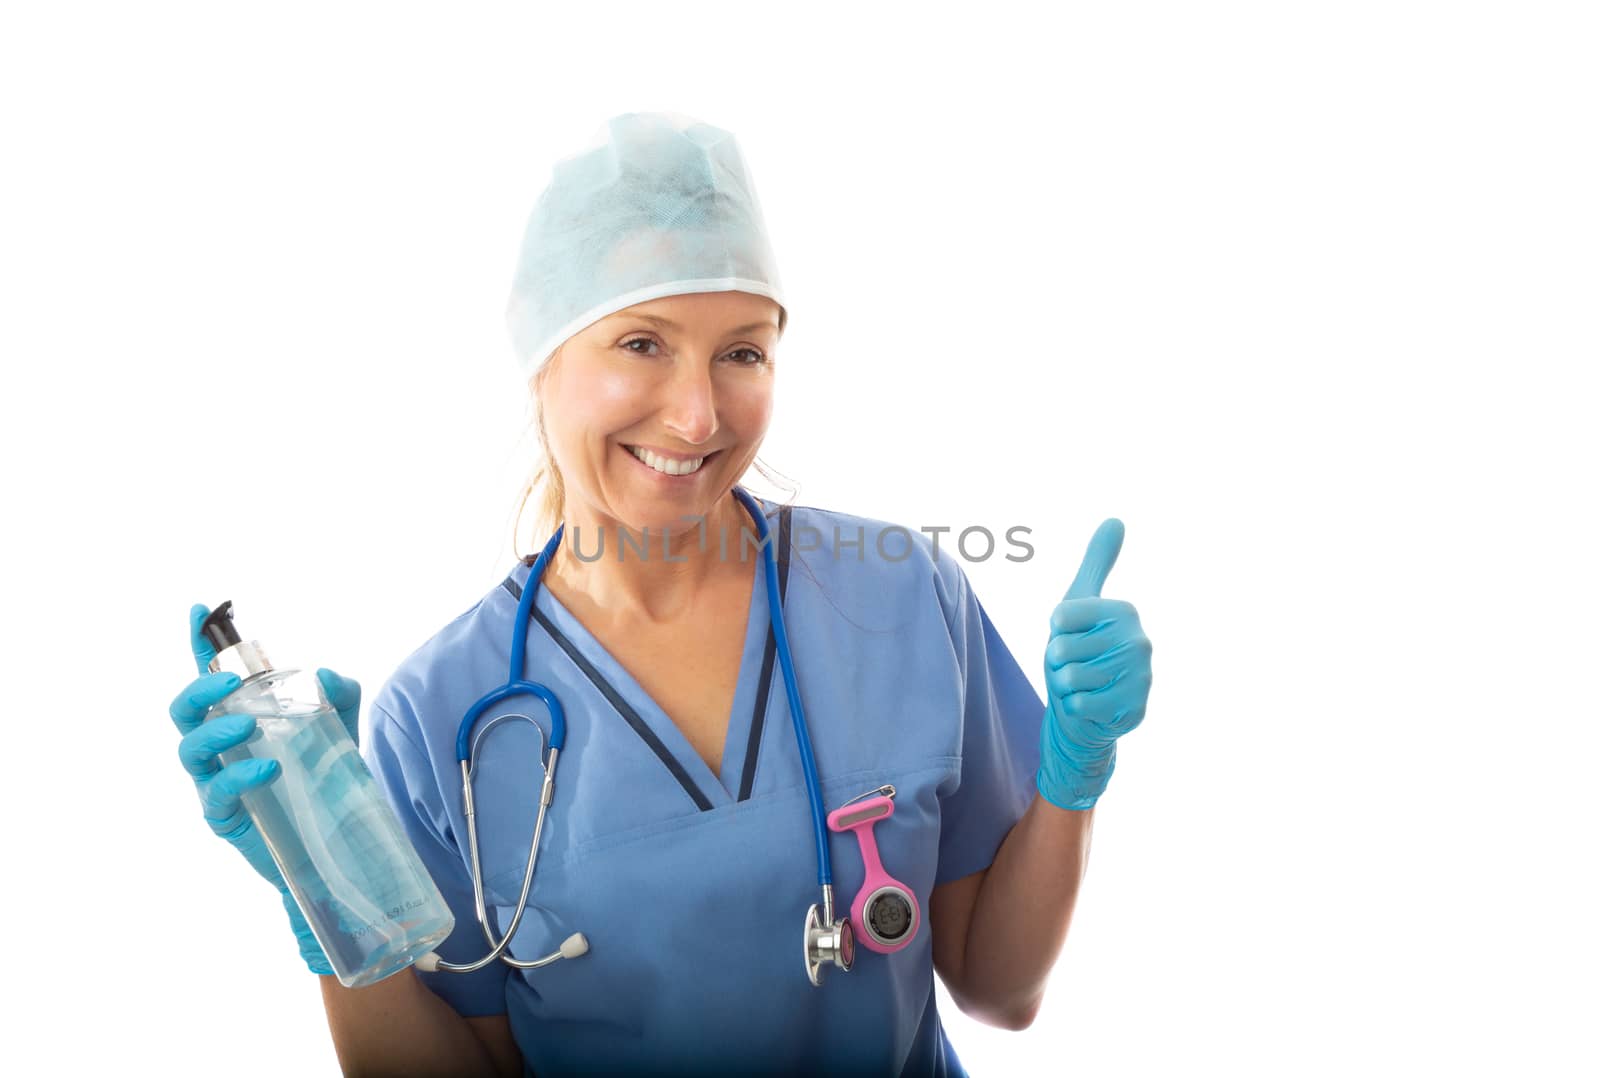 Friendly smiling hospital nurse, or medical professional holding a bottle of hand sanitizer and giving a thumbs up gesture